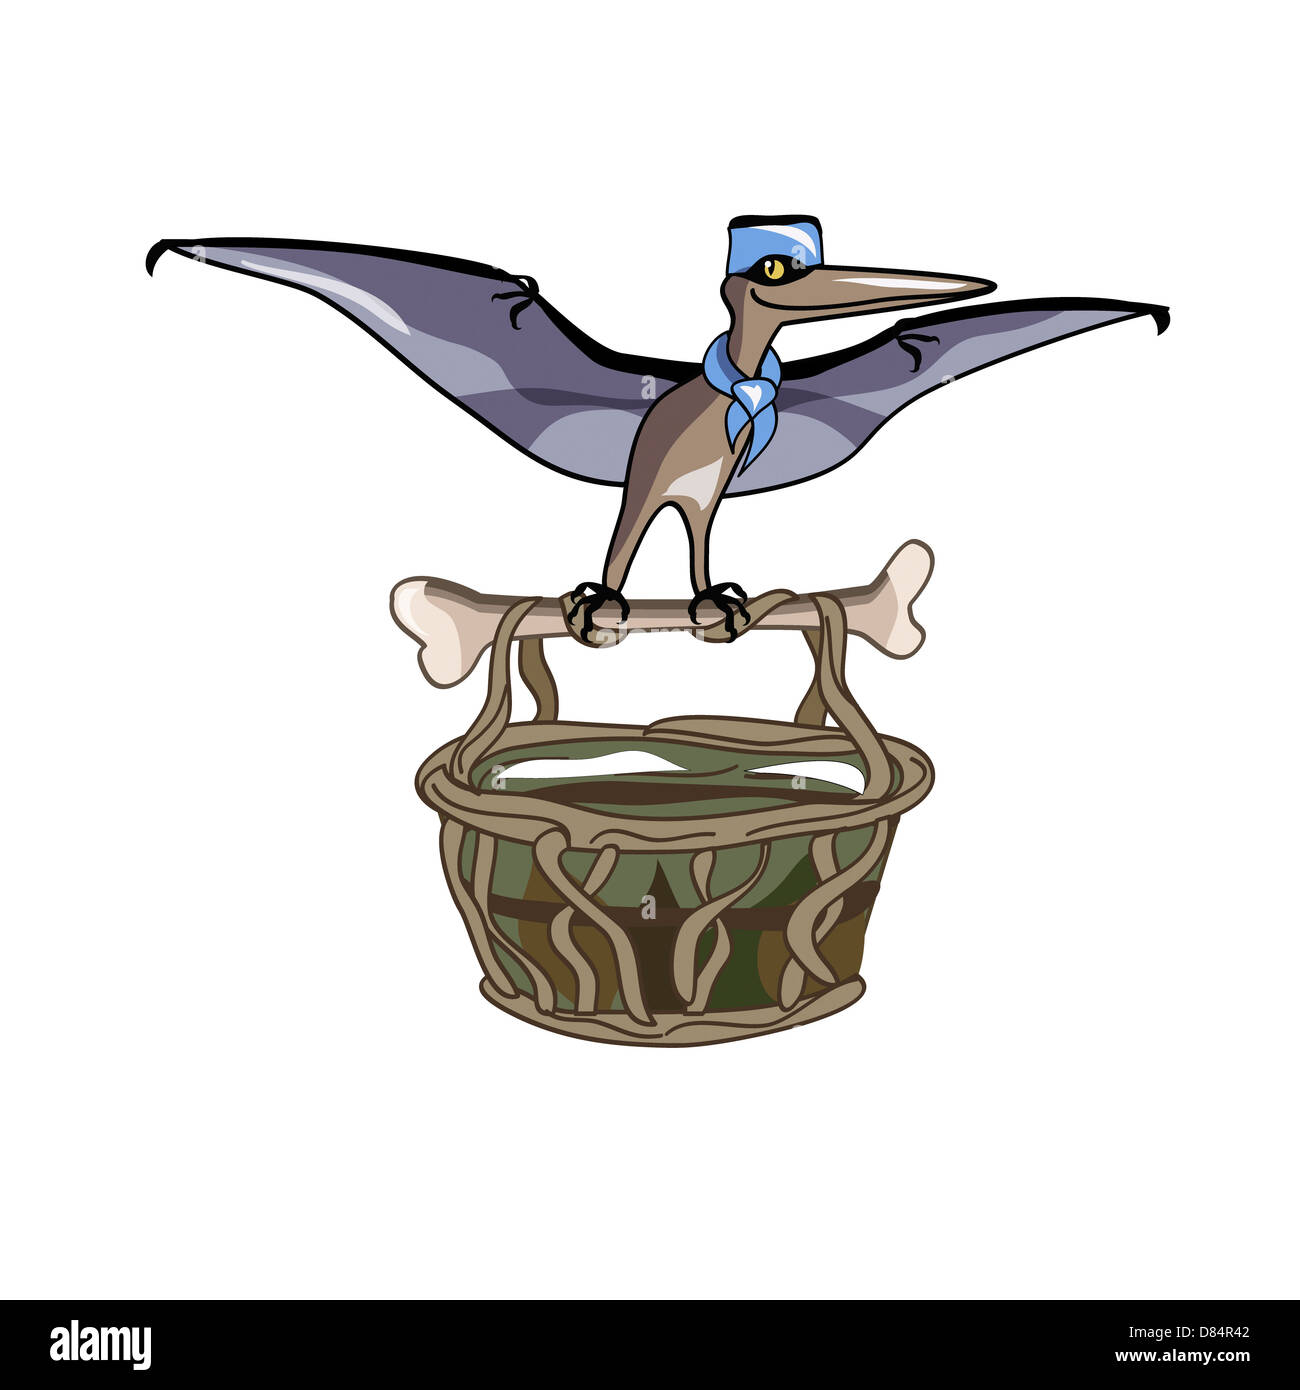 Illustration of a Pteranodon carrying a basket, representing dino airlines. Stock Photo